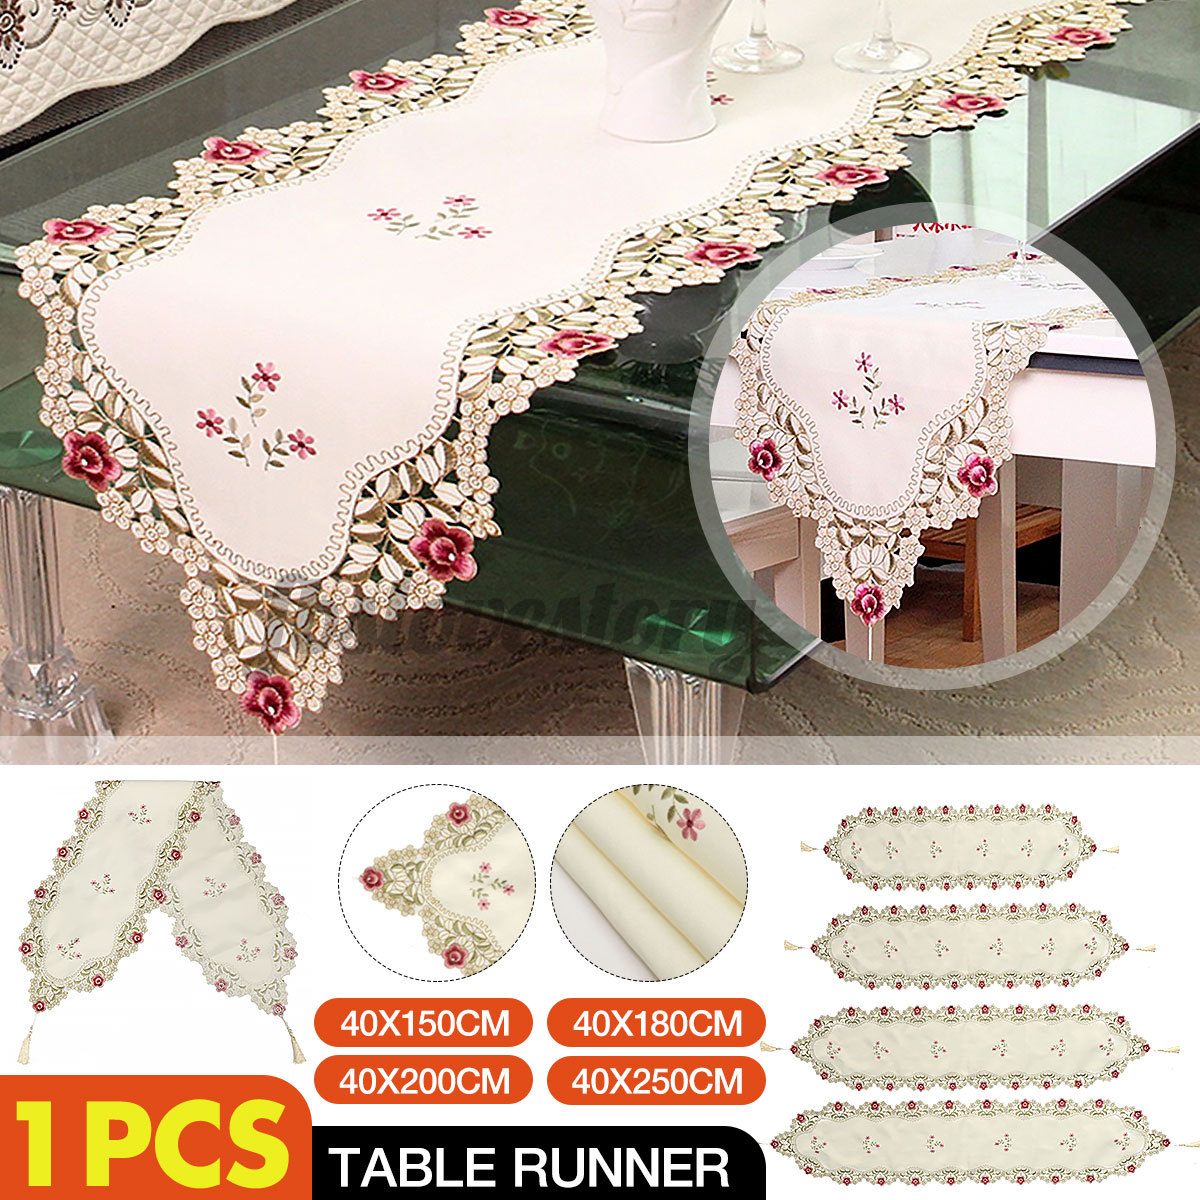 Table Runner Embroidered Floral Lace Translucent Gauze Table Cloth Vintage